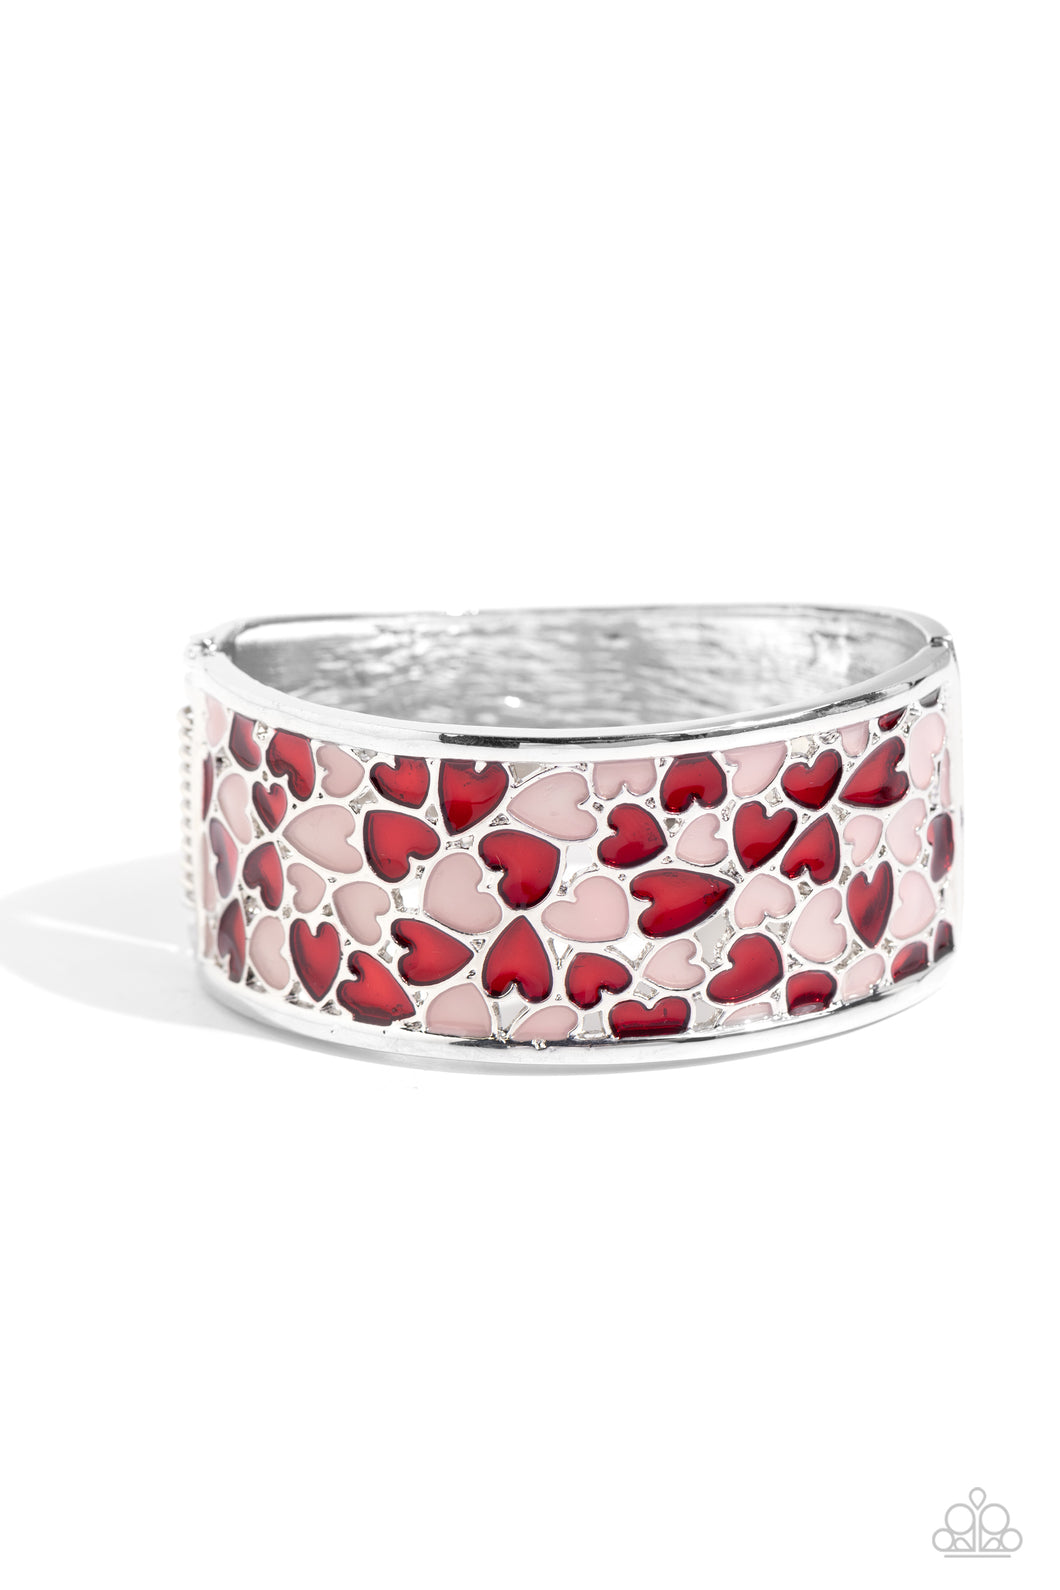 Paparazzi Bracelet Penchant for Patterns - Red Coming Soon